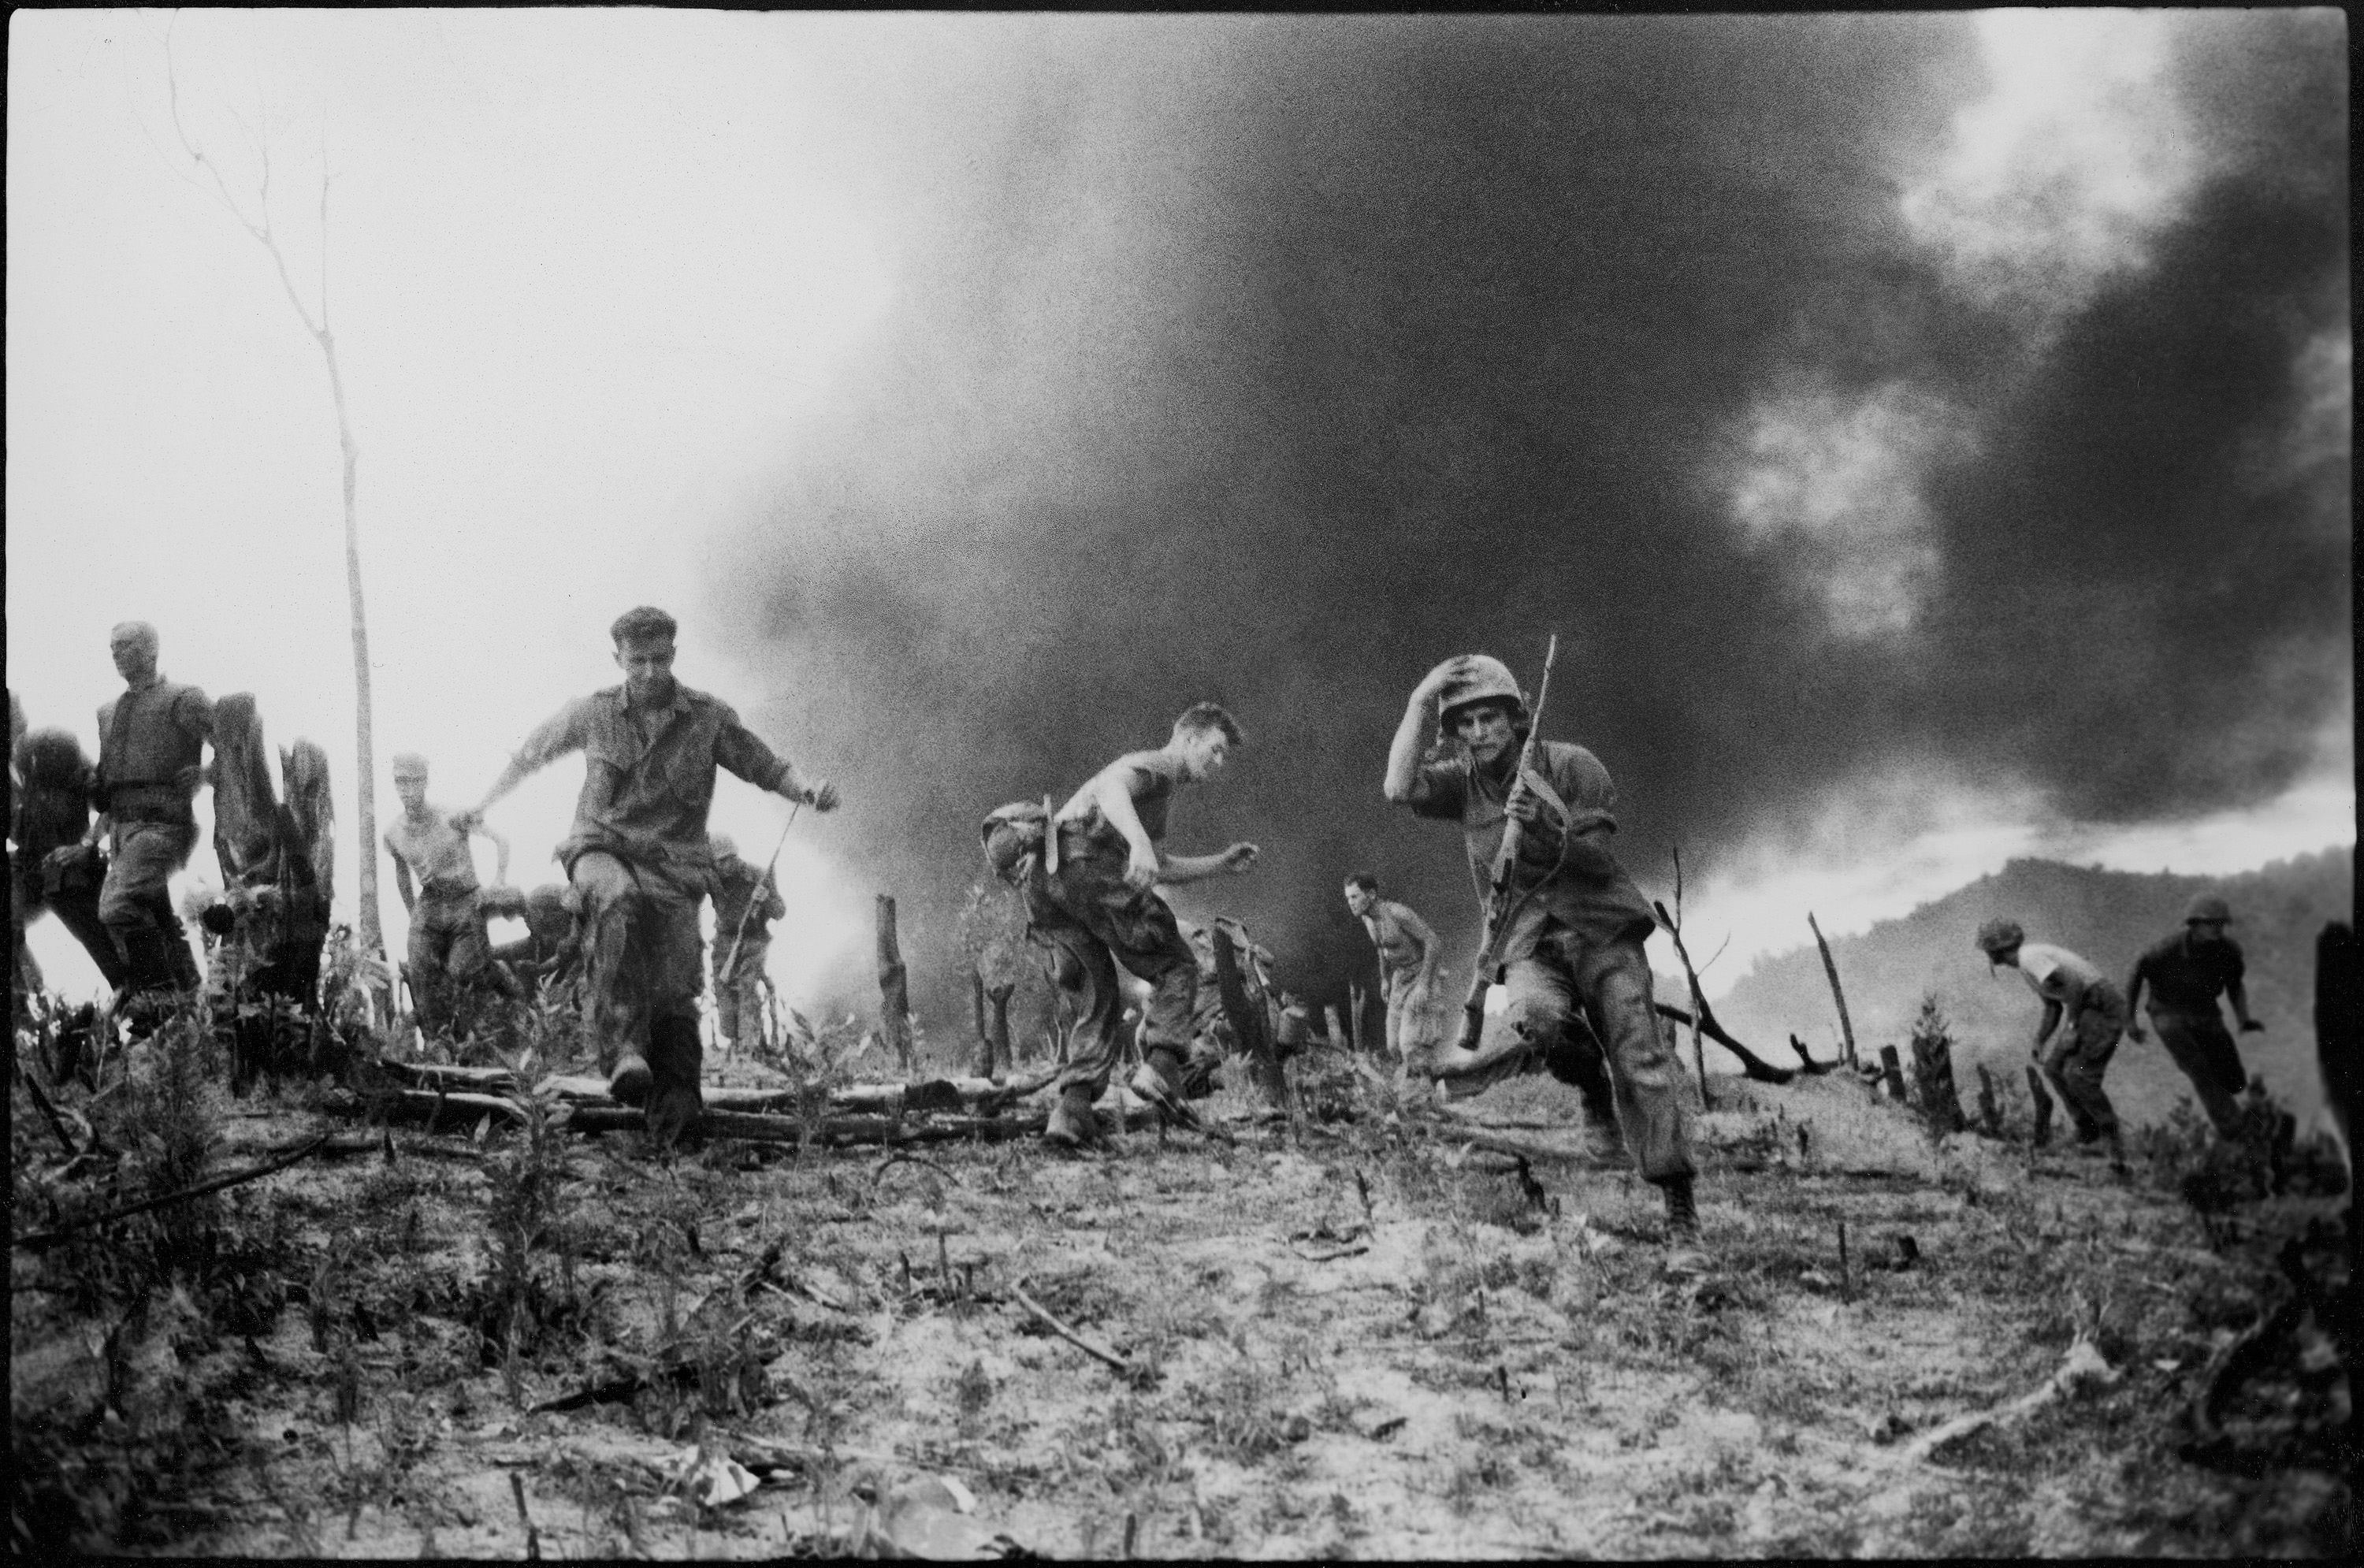 US Marines scatter as a CH-46 helicopter burns Vietnam, July, 1966.jpg